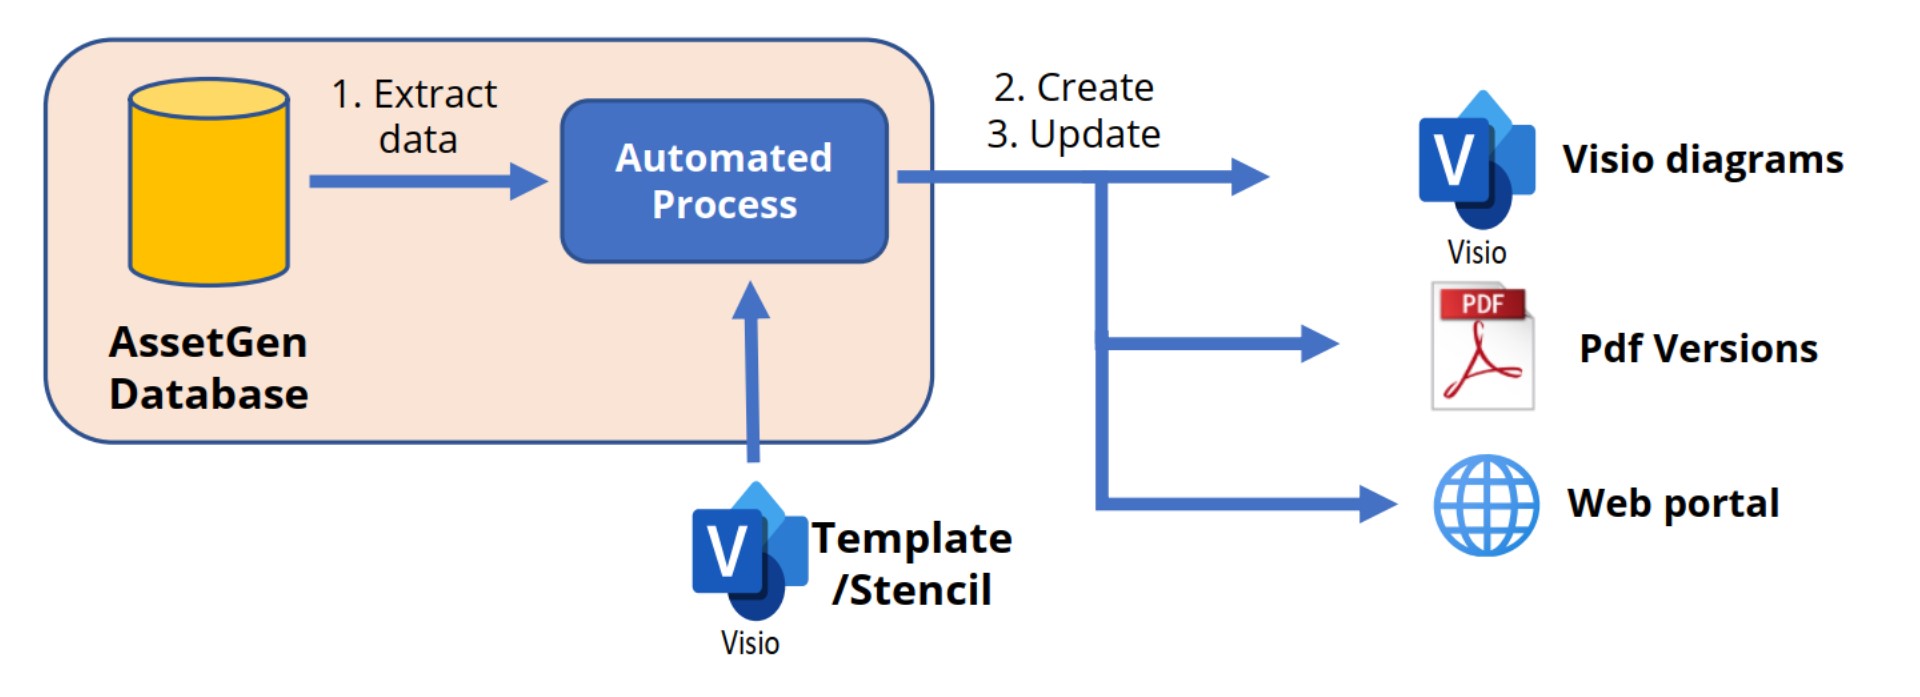 Hands off Visio automation